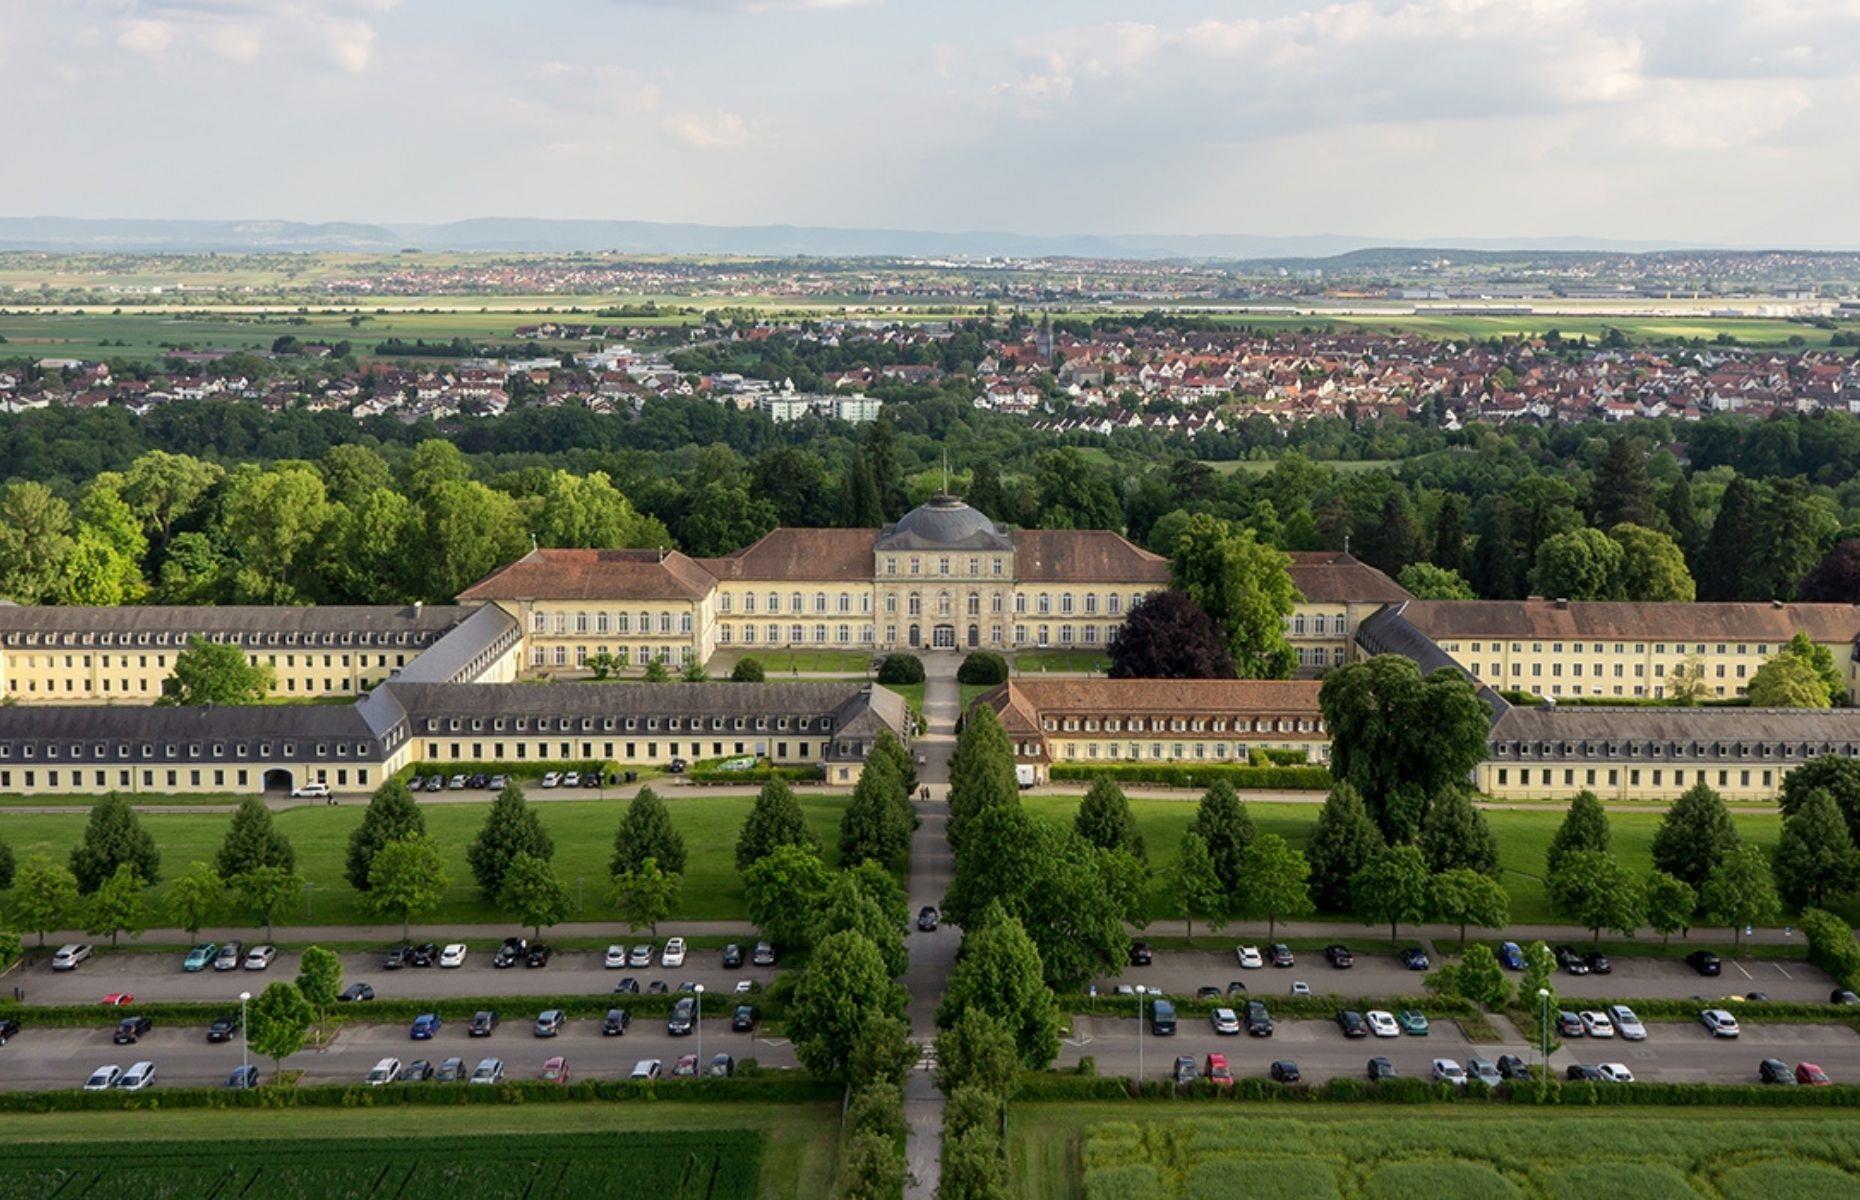 <p>Akin to a noble palace, the <a href="https://www.uni-hohenheim.de/en">University of Hohenheim</a> is located to the south of Stuttgart and dates back to 1818. Awe-inspiring in terms of size and grandeur, the property also has a poignant history. In the 1940s, during the Second World War, around 250 people were deported to Hohenheim for forced labour. Today, a memorial sculpture can be found on university grounds, commemorating those that suffered and lost their lives during the Nazi regime.</p>